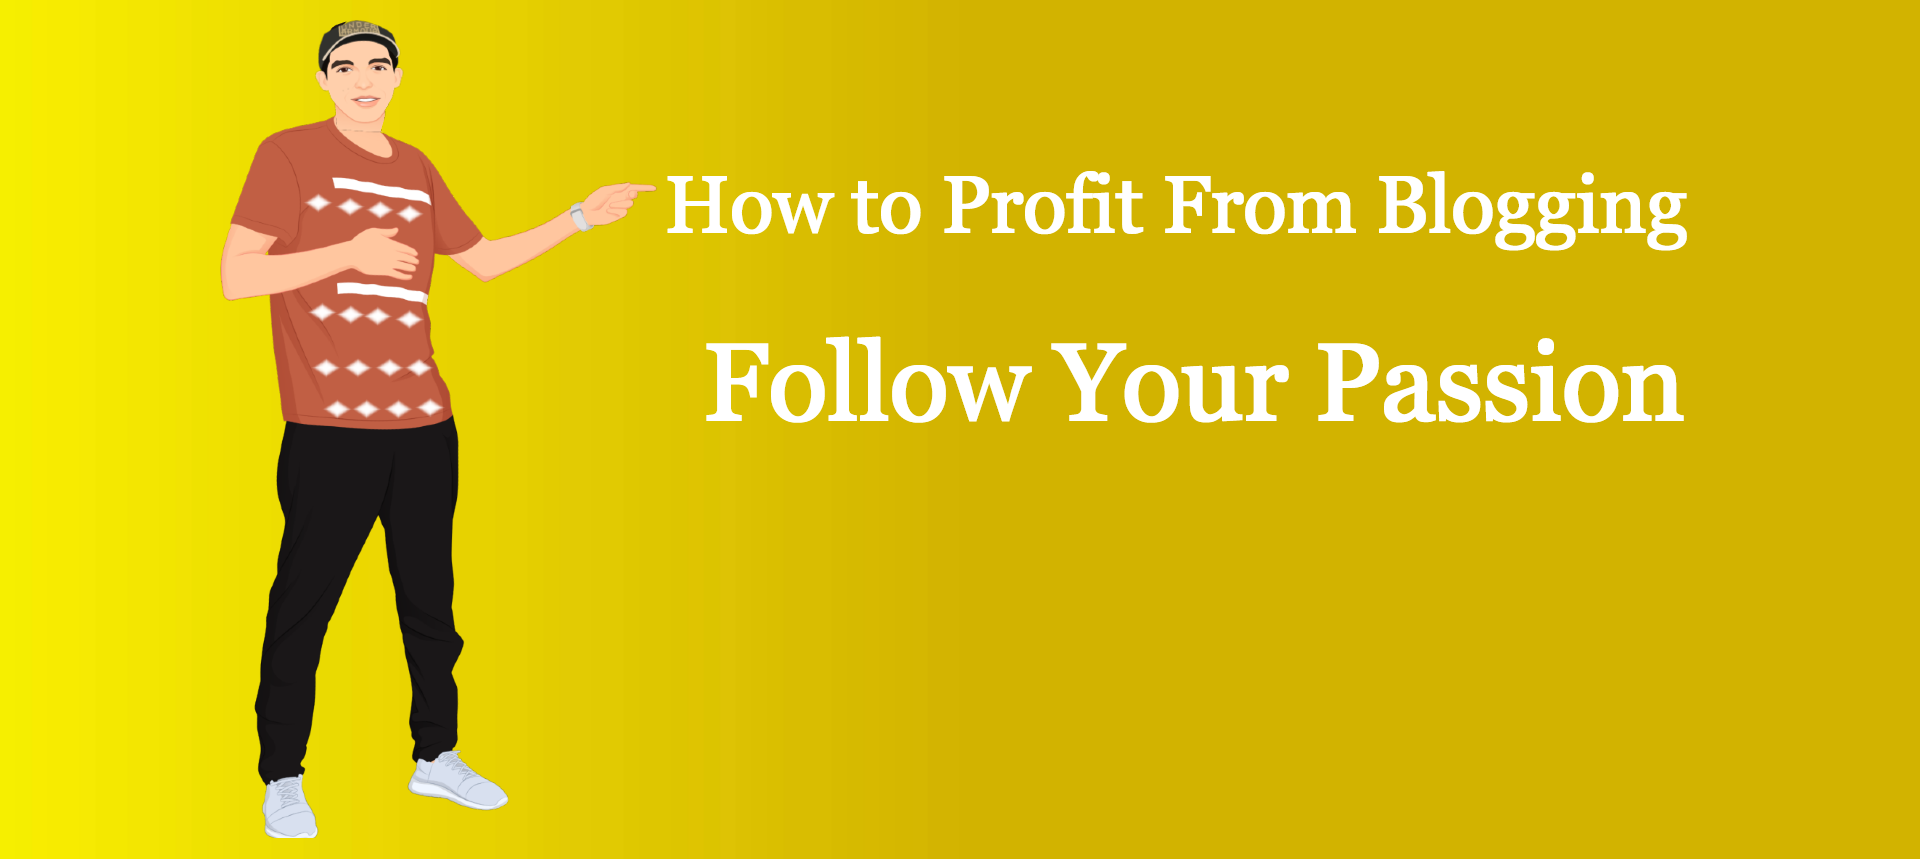 follow your passion to profit